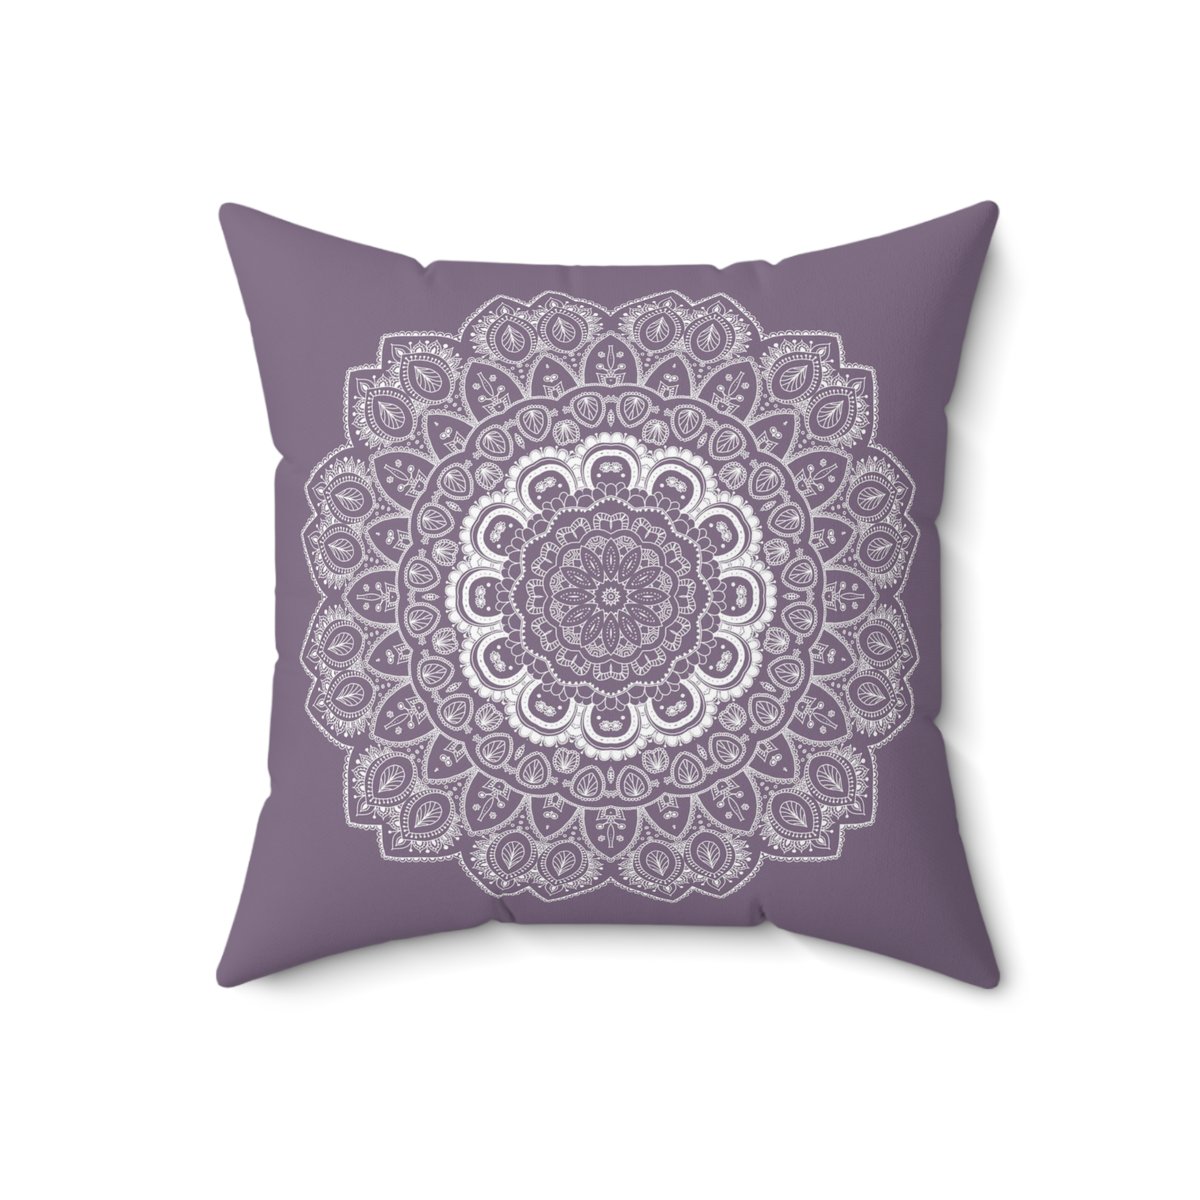 etsy.com/feelgoodathome…
Decorative Throw Pillow Cover or Pair of Shams, Mandala, Purple, Lilac, Square, Rectangular, Double-sided print, Indoors, Outdoors, Gift
#throwpillow #lavender #mandala #symmetry #harmony #zen #gift #decorativepillow #homedecor #Easter #Christmas